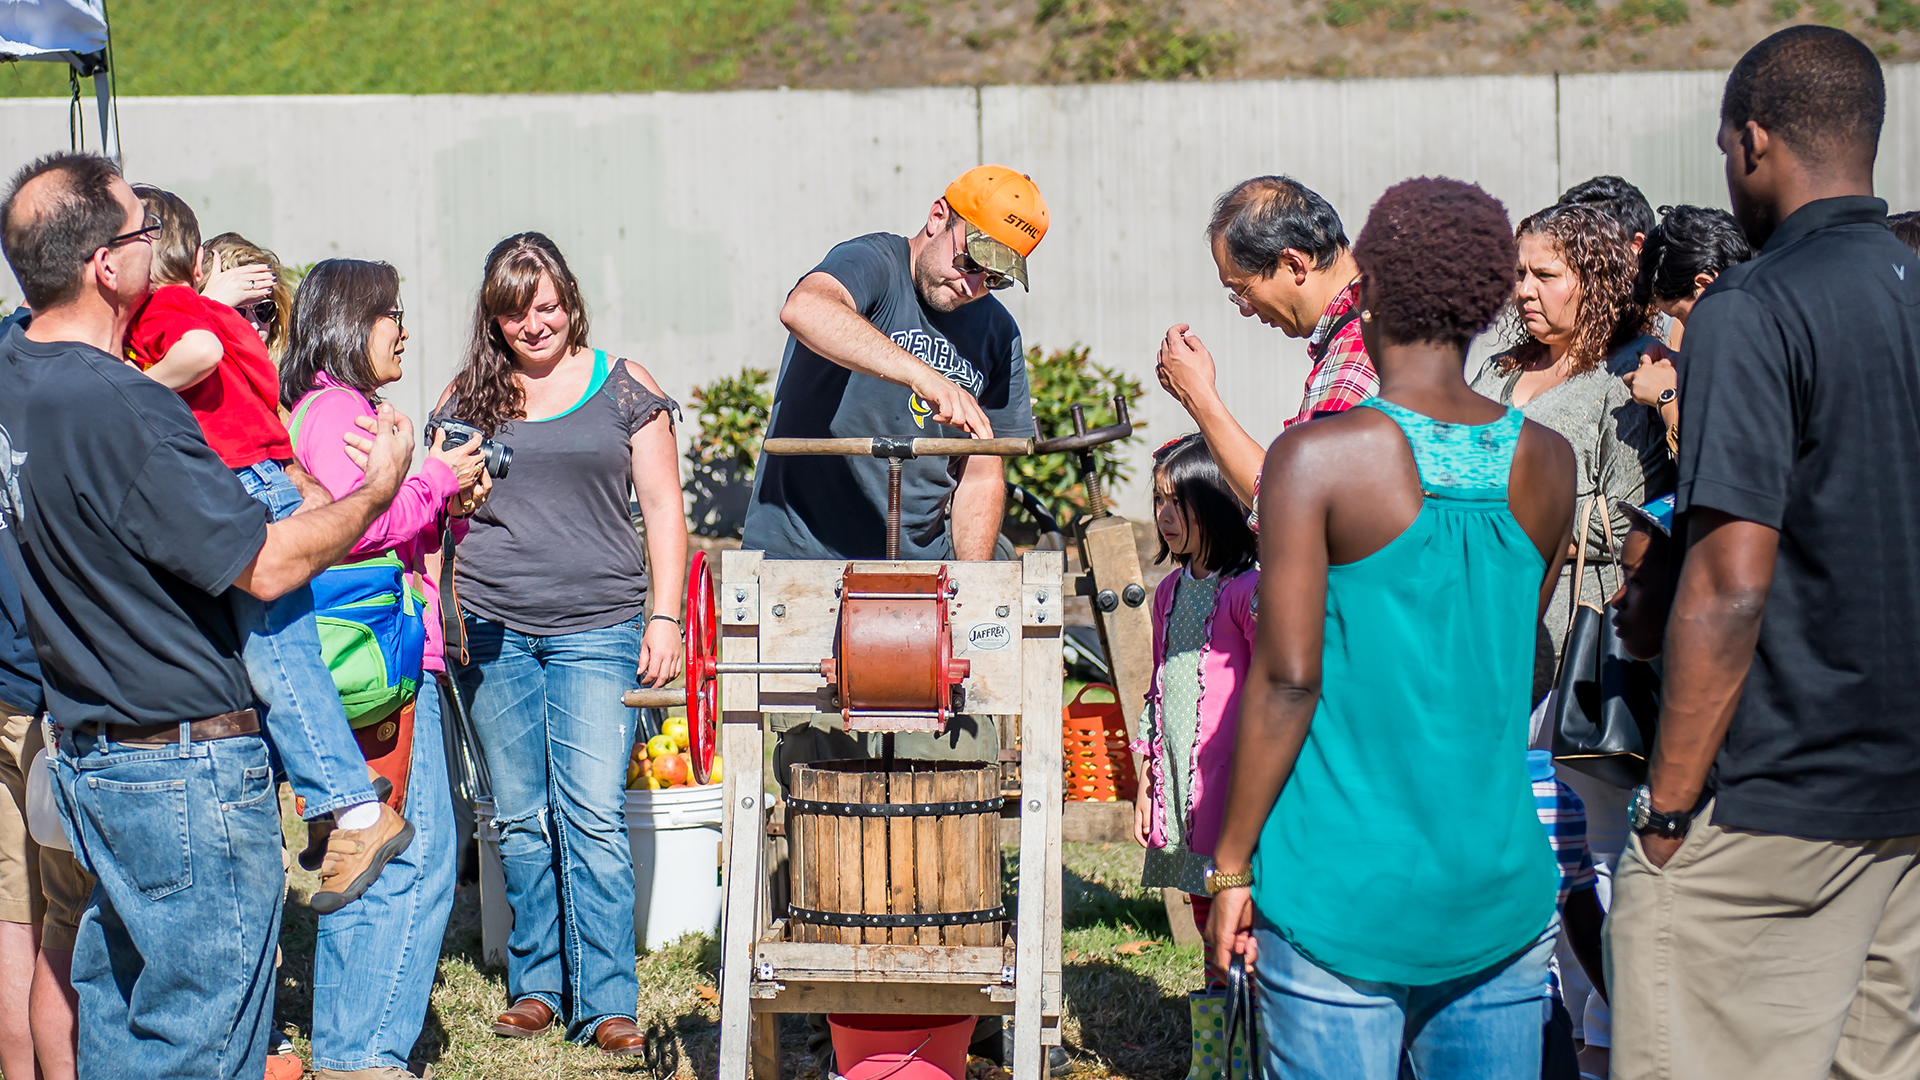 Cider pressing during Vancouver's Old Apple Tree Festival